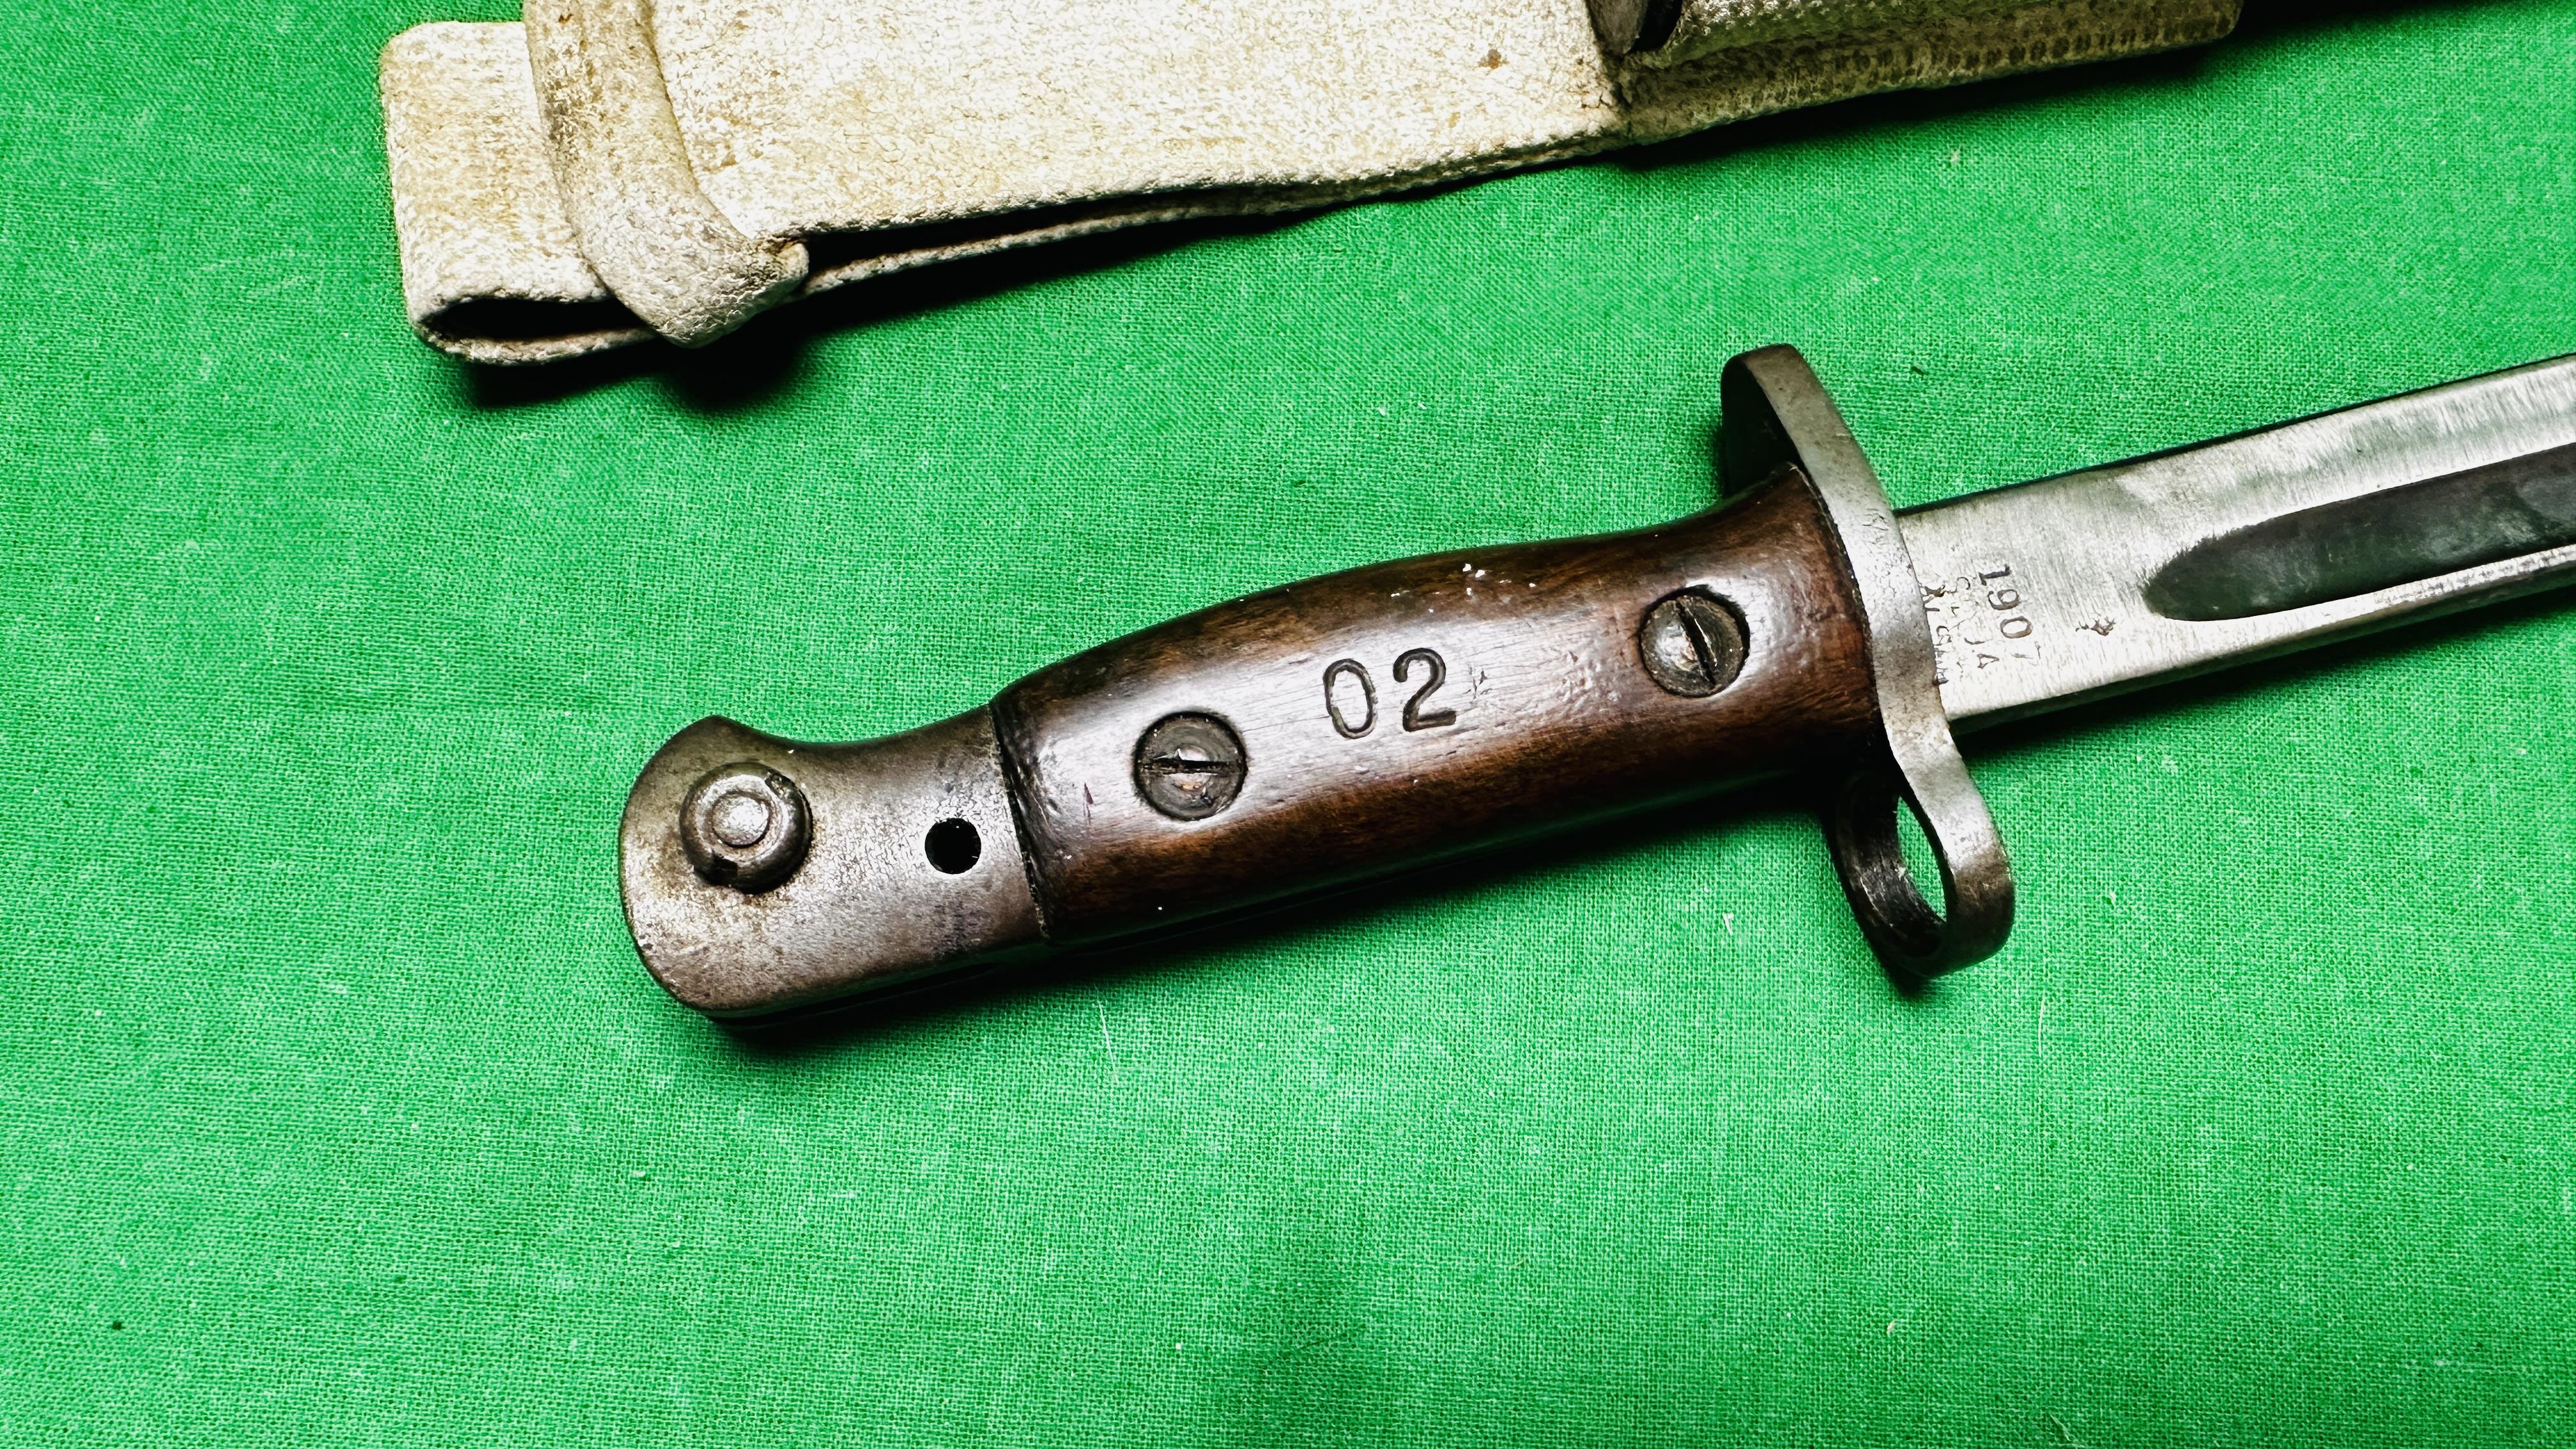 BRITISH 1907 BAYONET WITH SCABBARD ALONG WITH SNAIL BRAND CRATE HAMMER - NO POSTAGE OR PACKING - Bild 6 aus 15